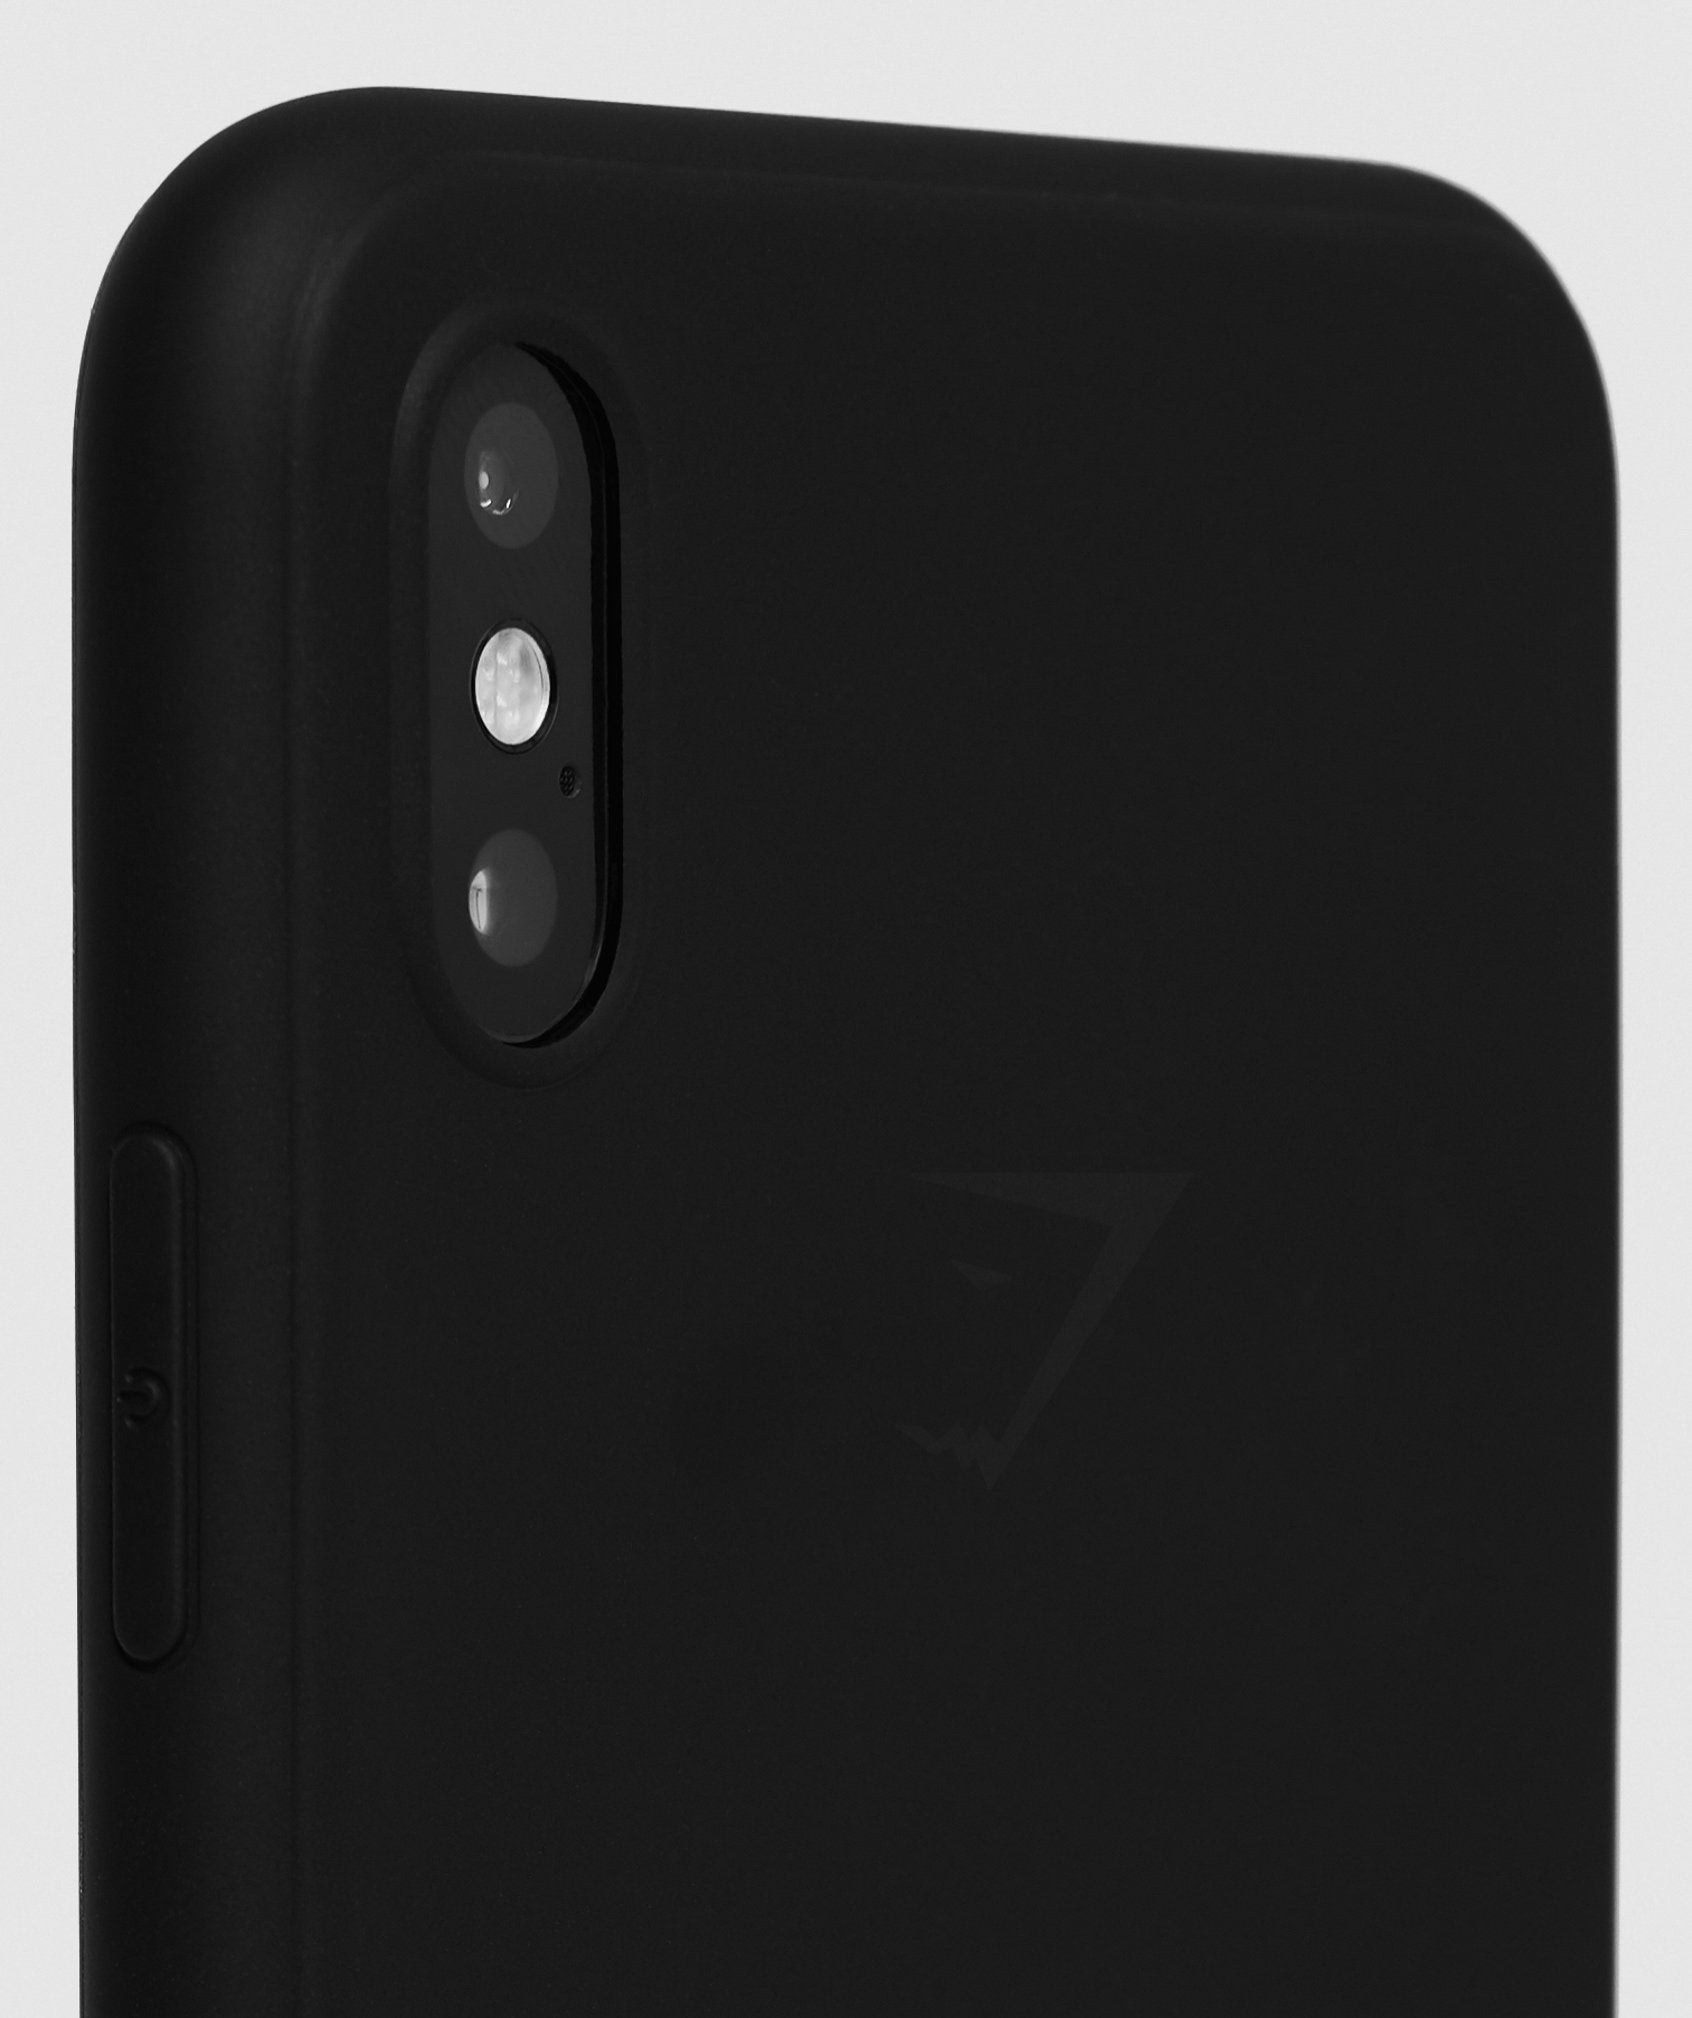 iPhone XS Max Case in Black - view 2